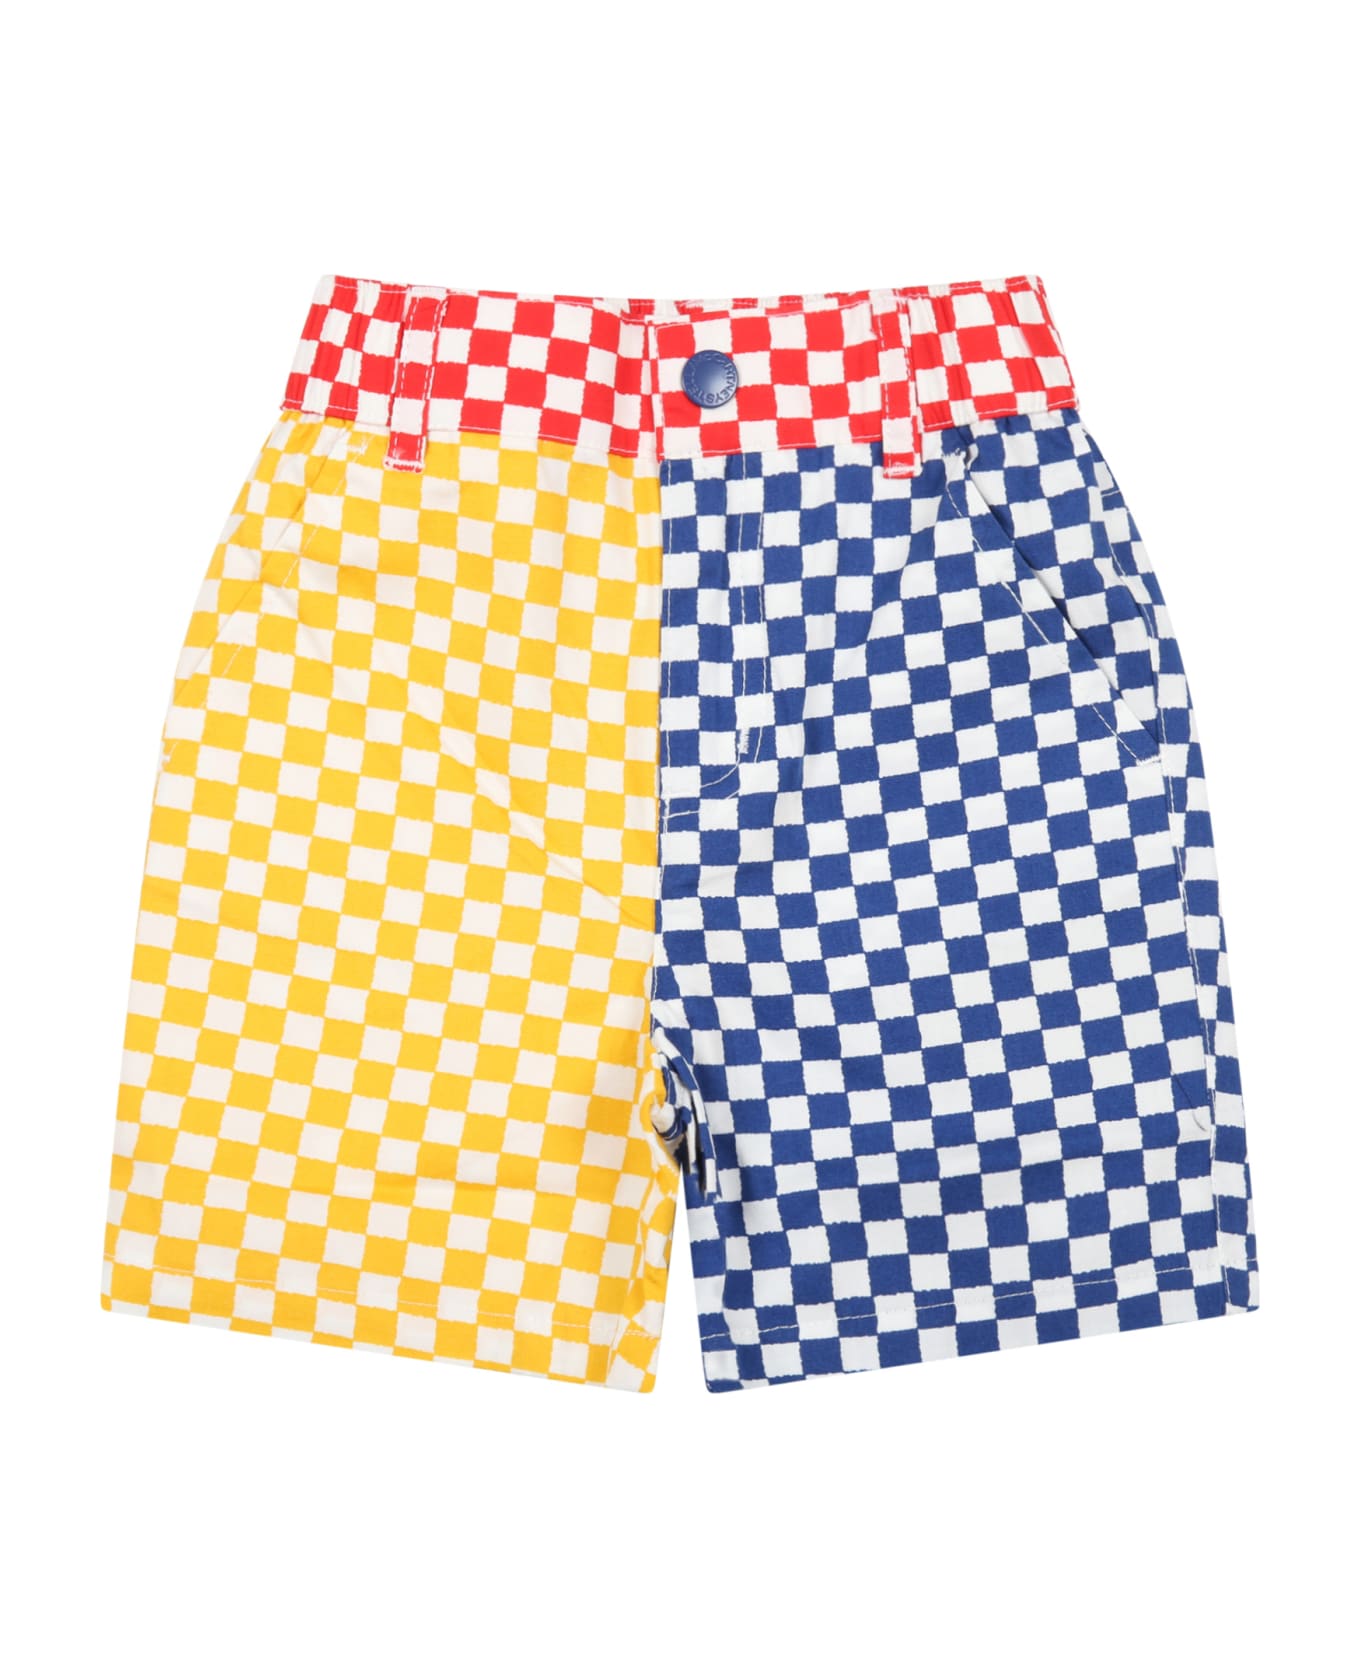 Stella McCartney Kids Multicolor Shorts For Baby Boy With Patch Logo - Multicolor